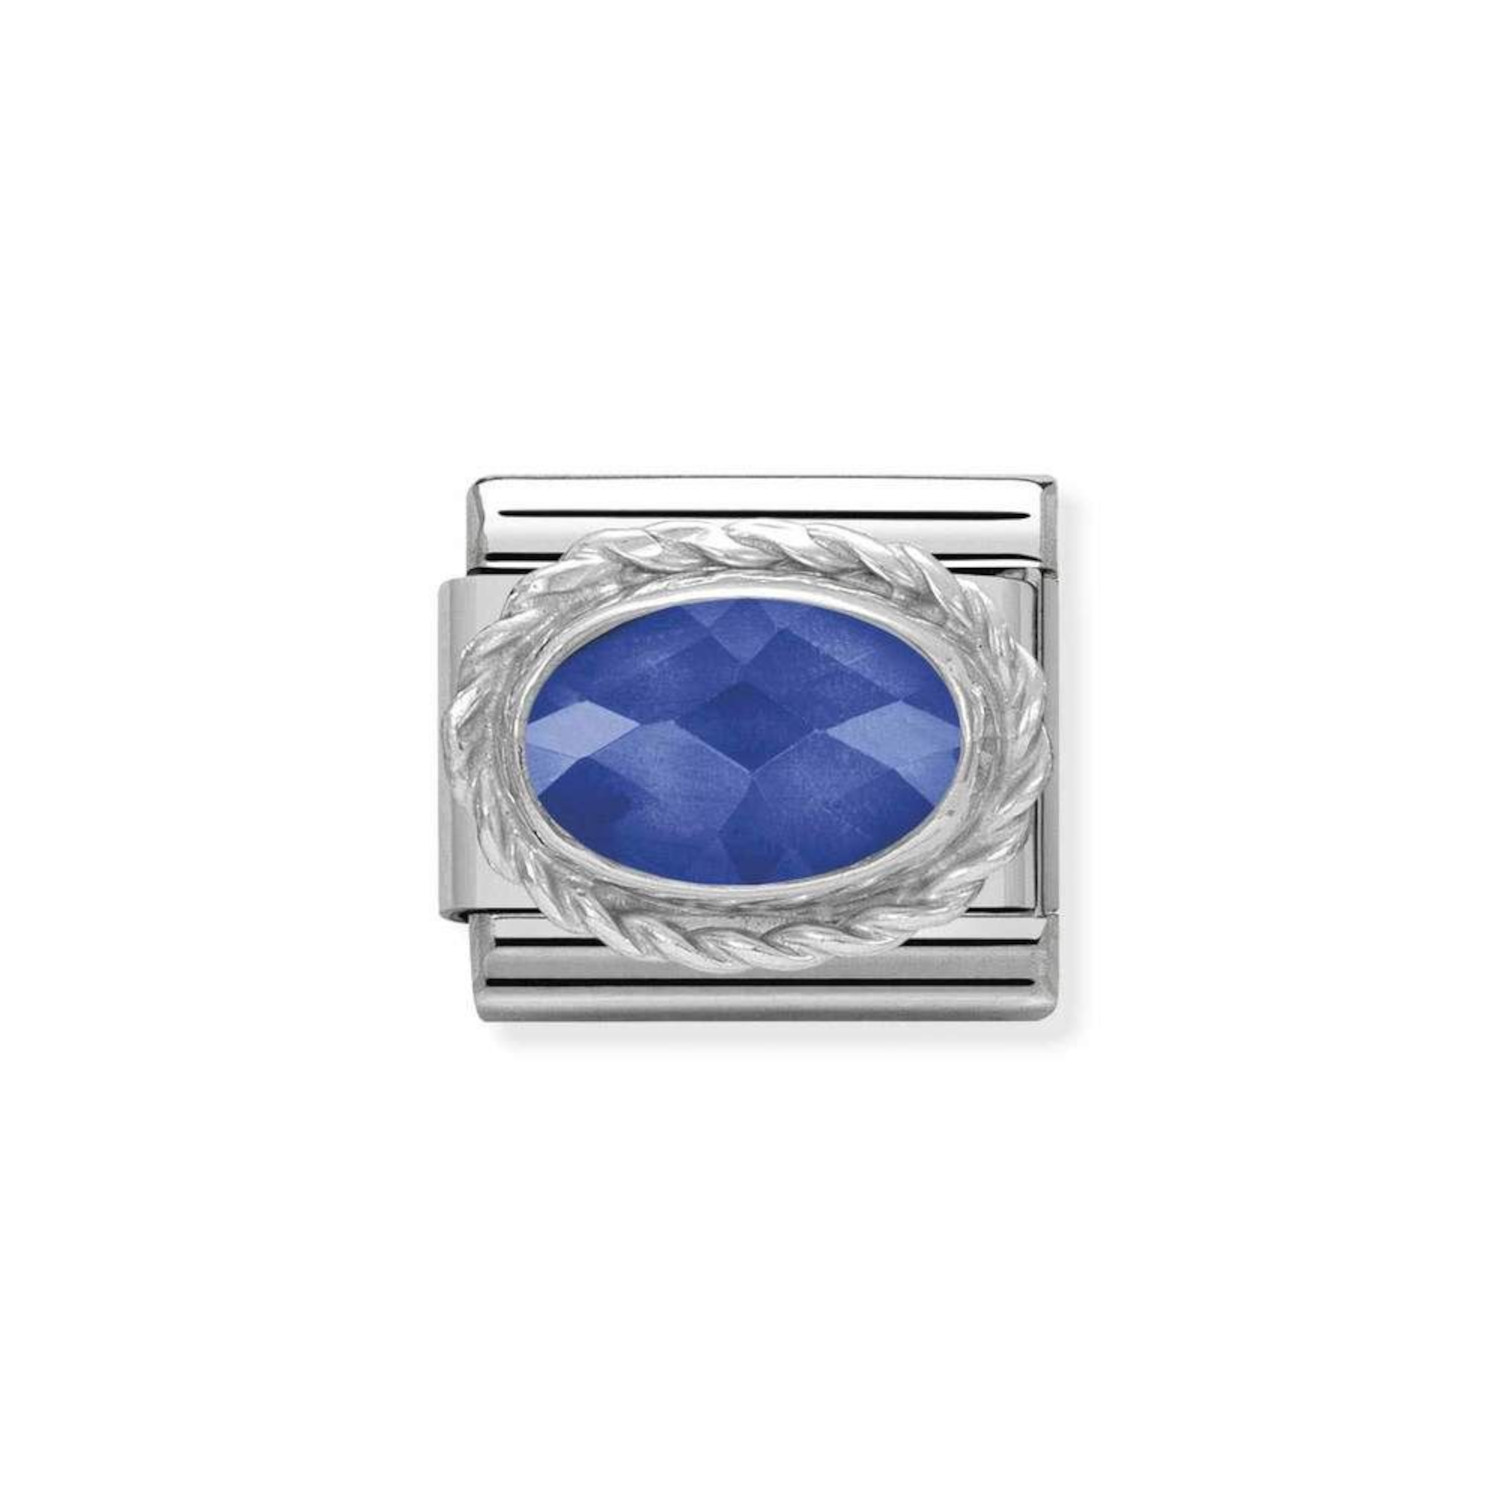 NOMINATION COMPOSABLE CLASSIC LINK IN STERLING SILVER WITH FACETED BLUE STONE 330604/007